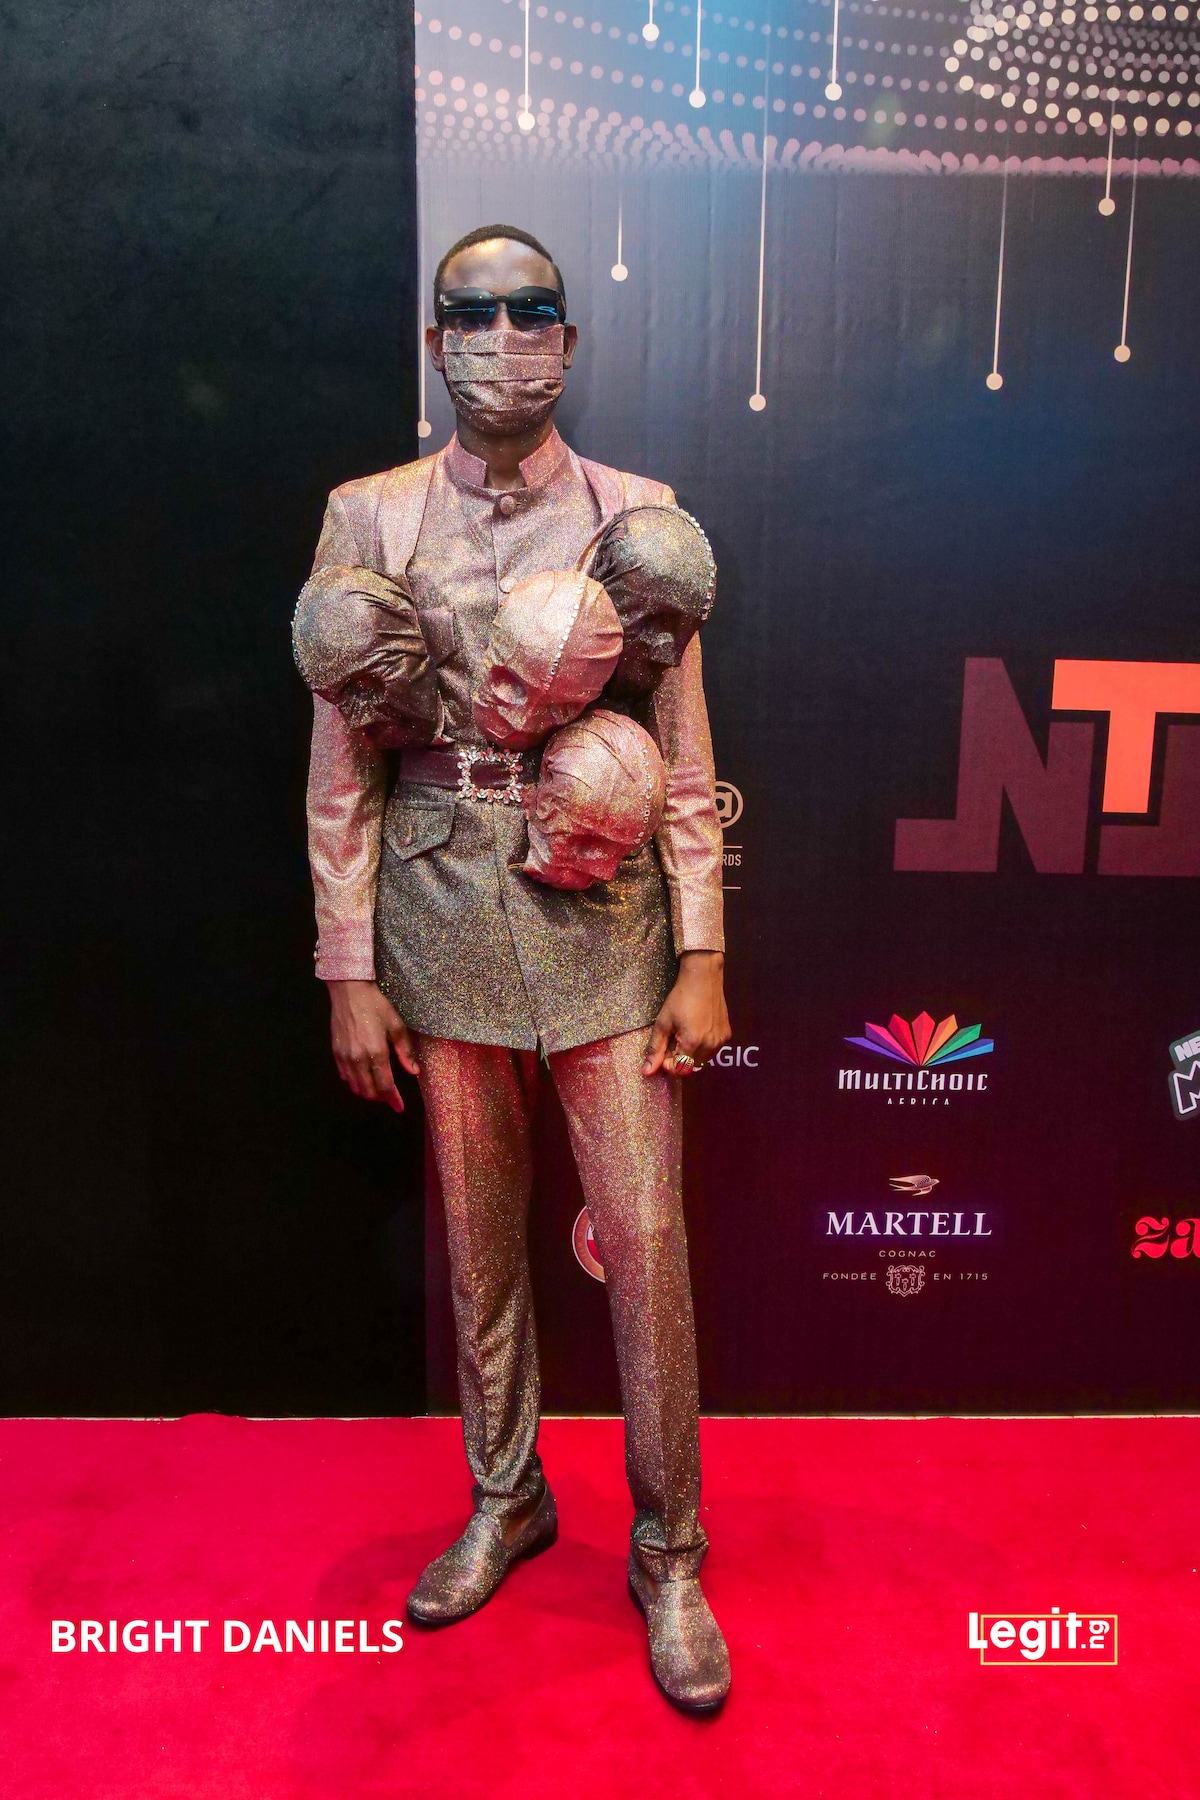 Best dressed at AMVCA 2020